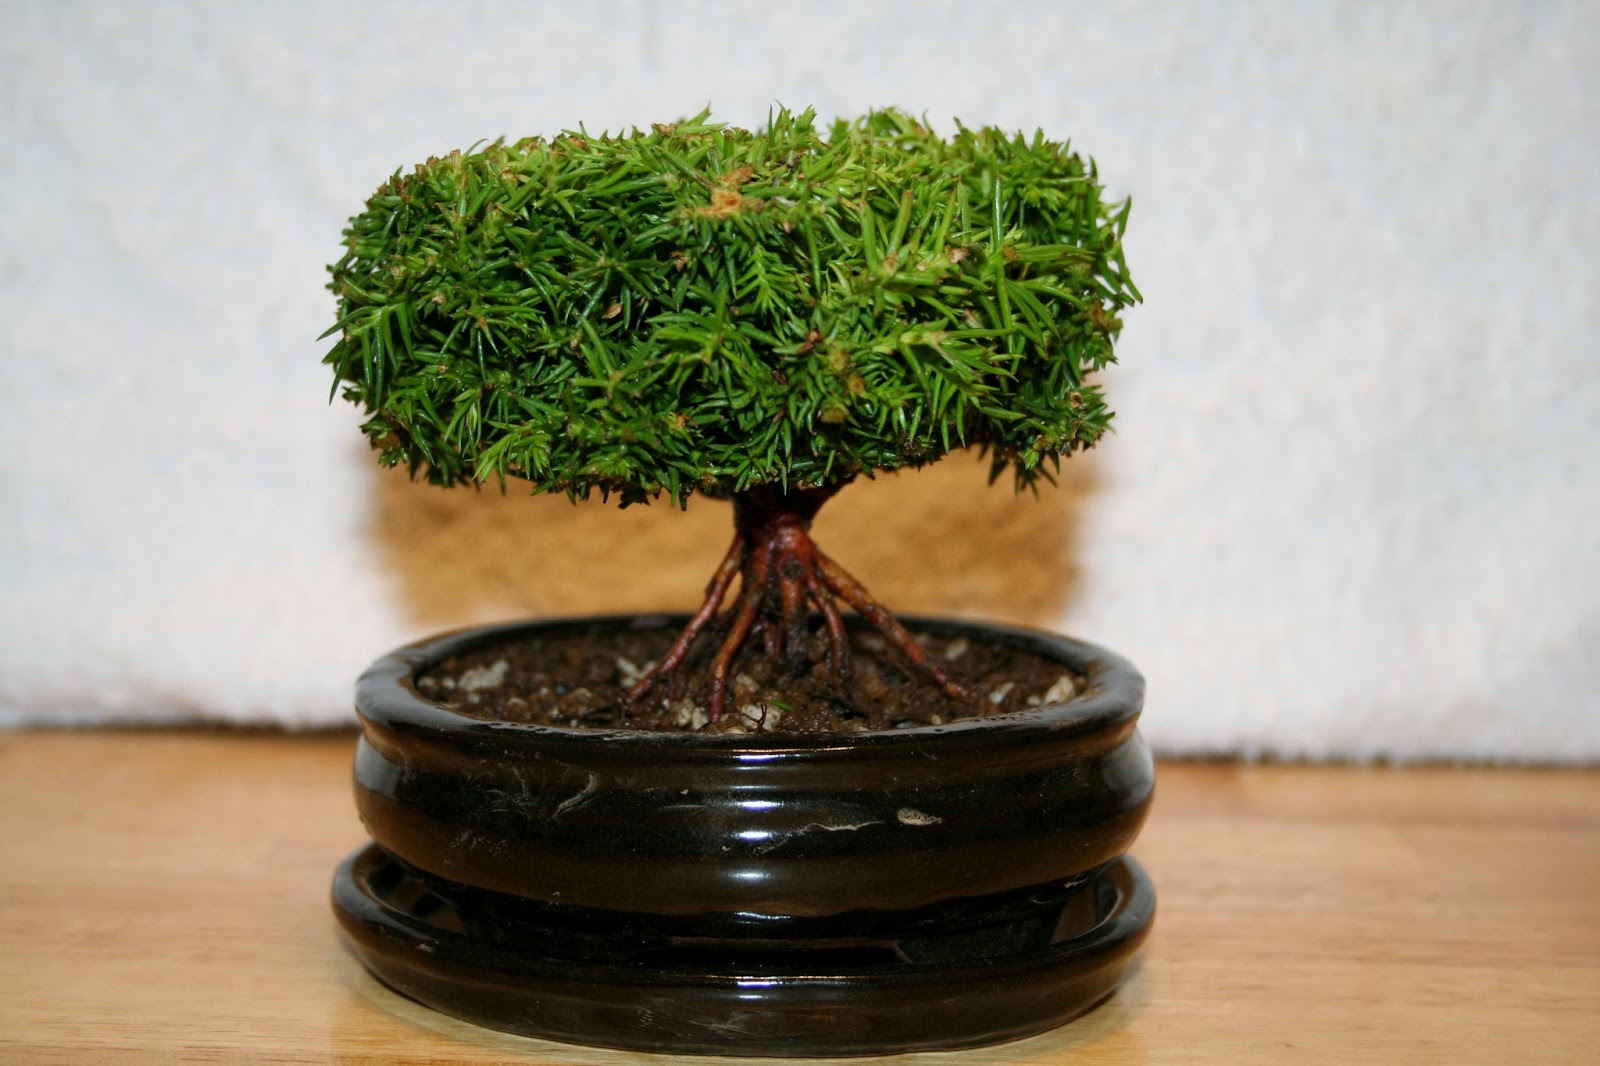 Bonsai trees available for sale.